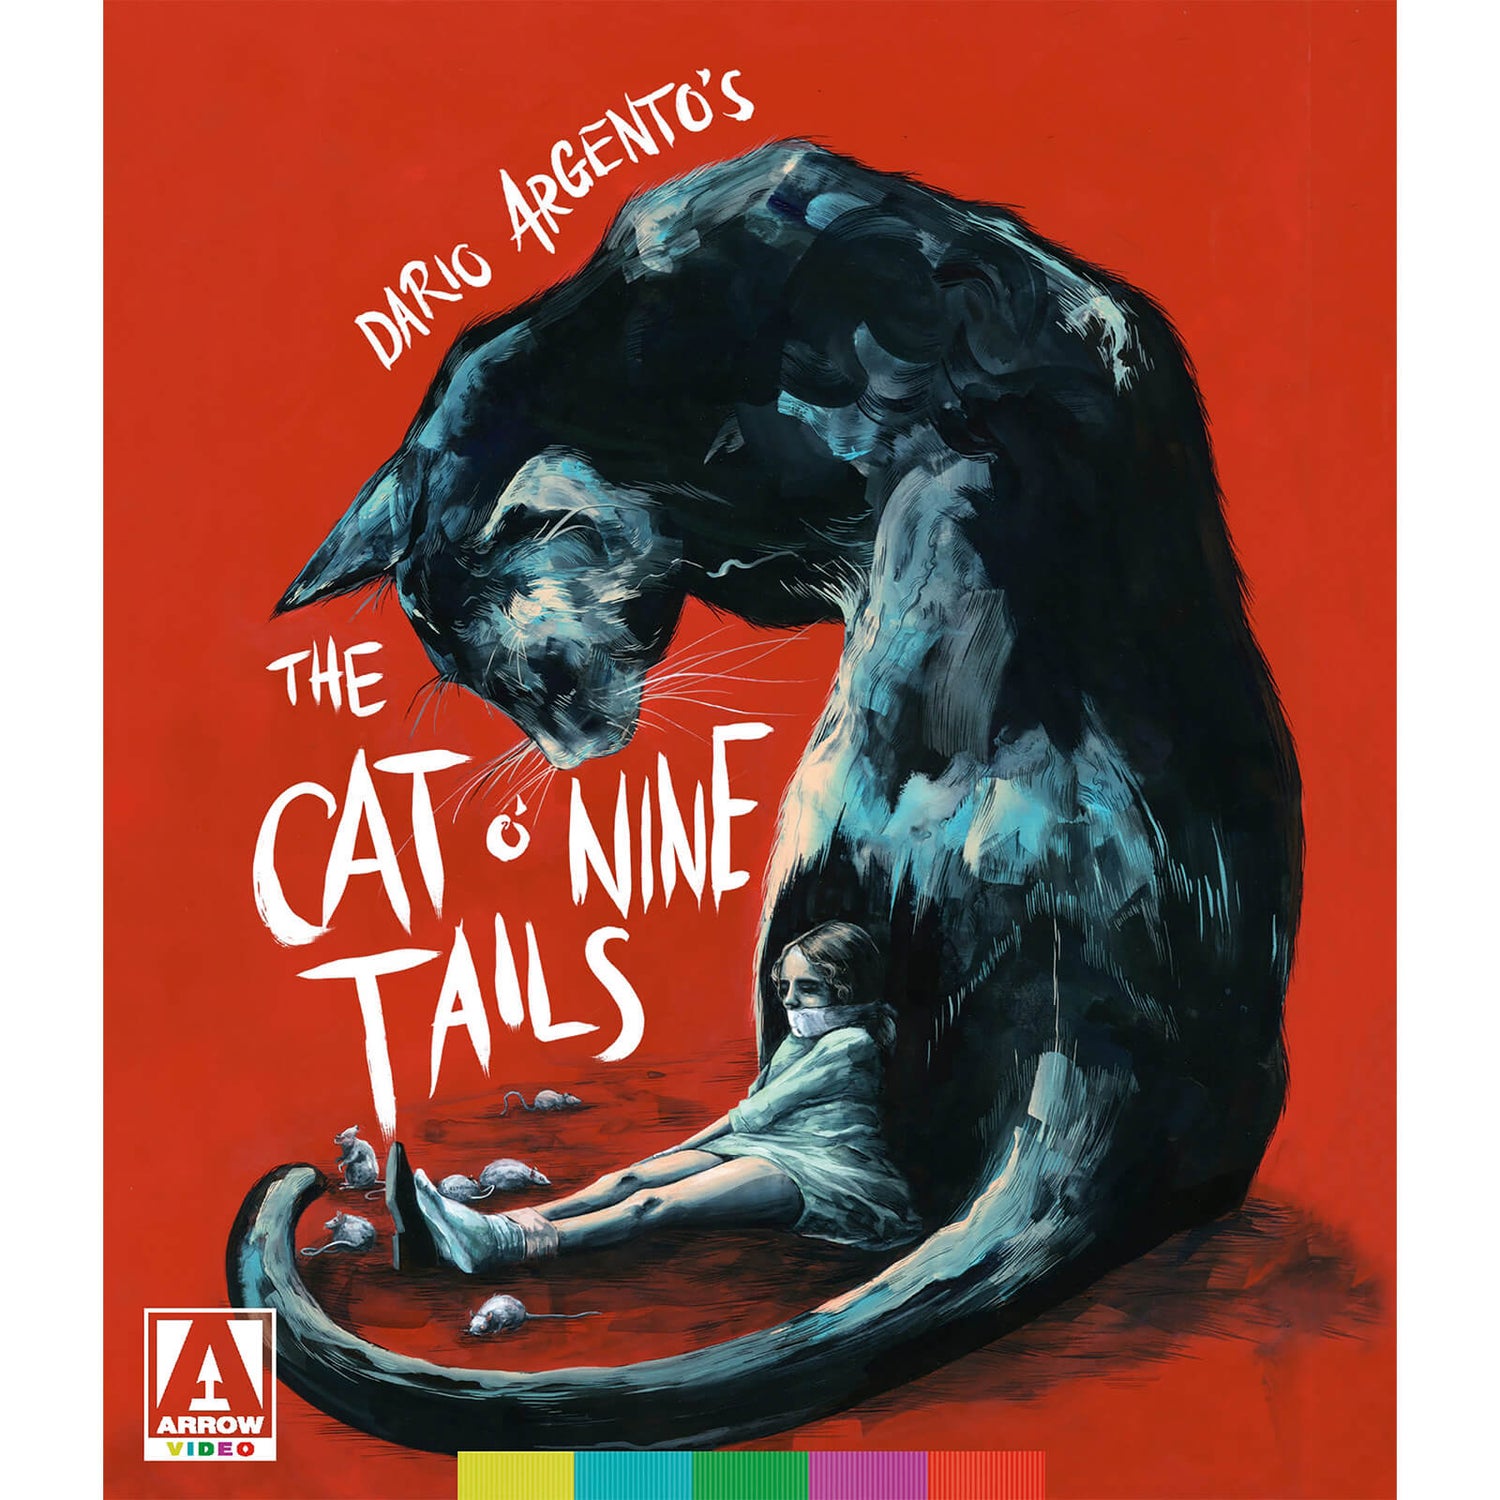 The Cat O' Nine Tails